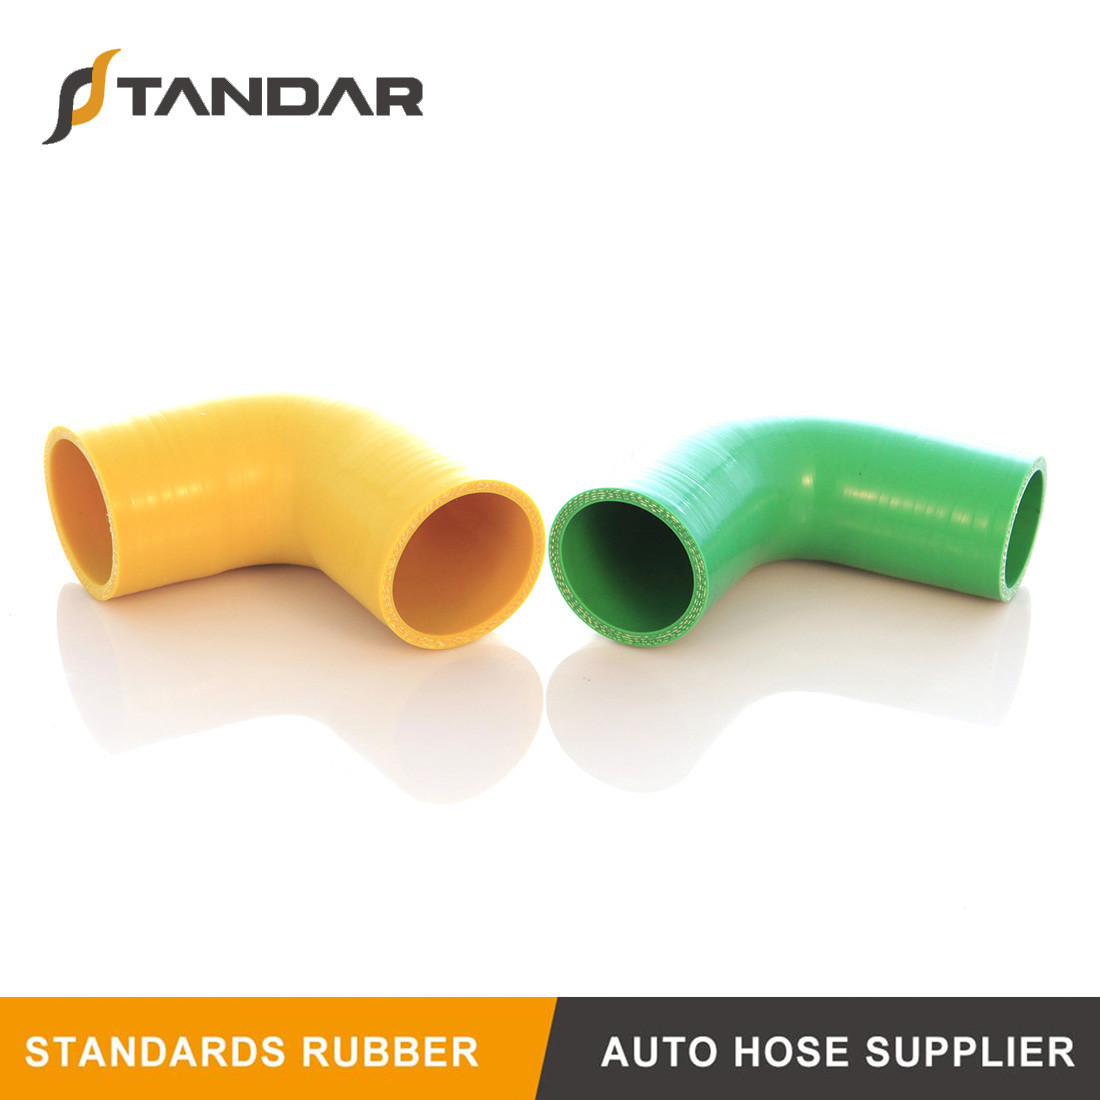 What kind of silicone tubing is industrial grade?